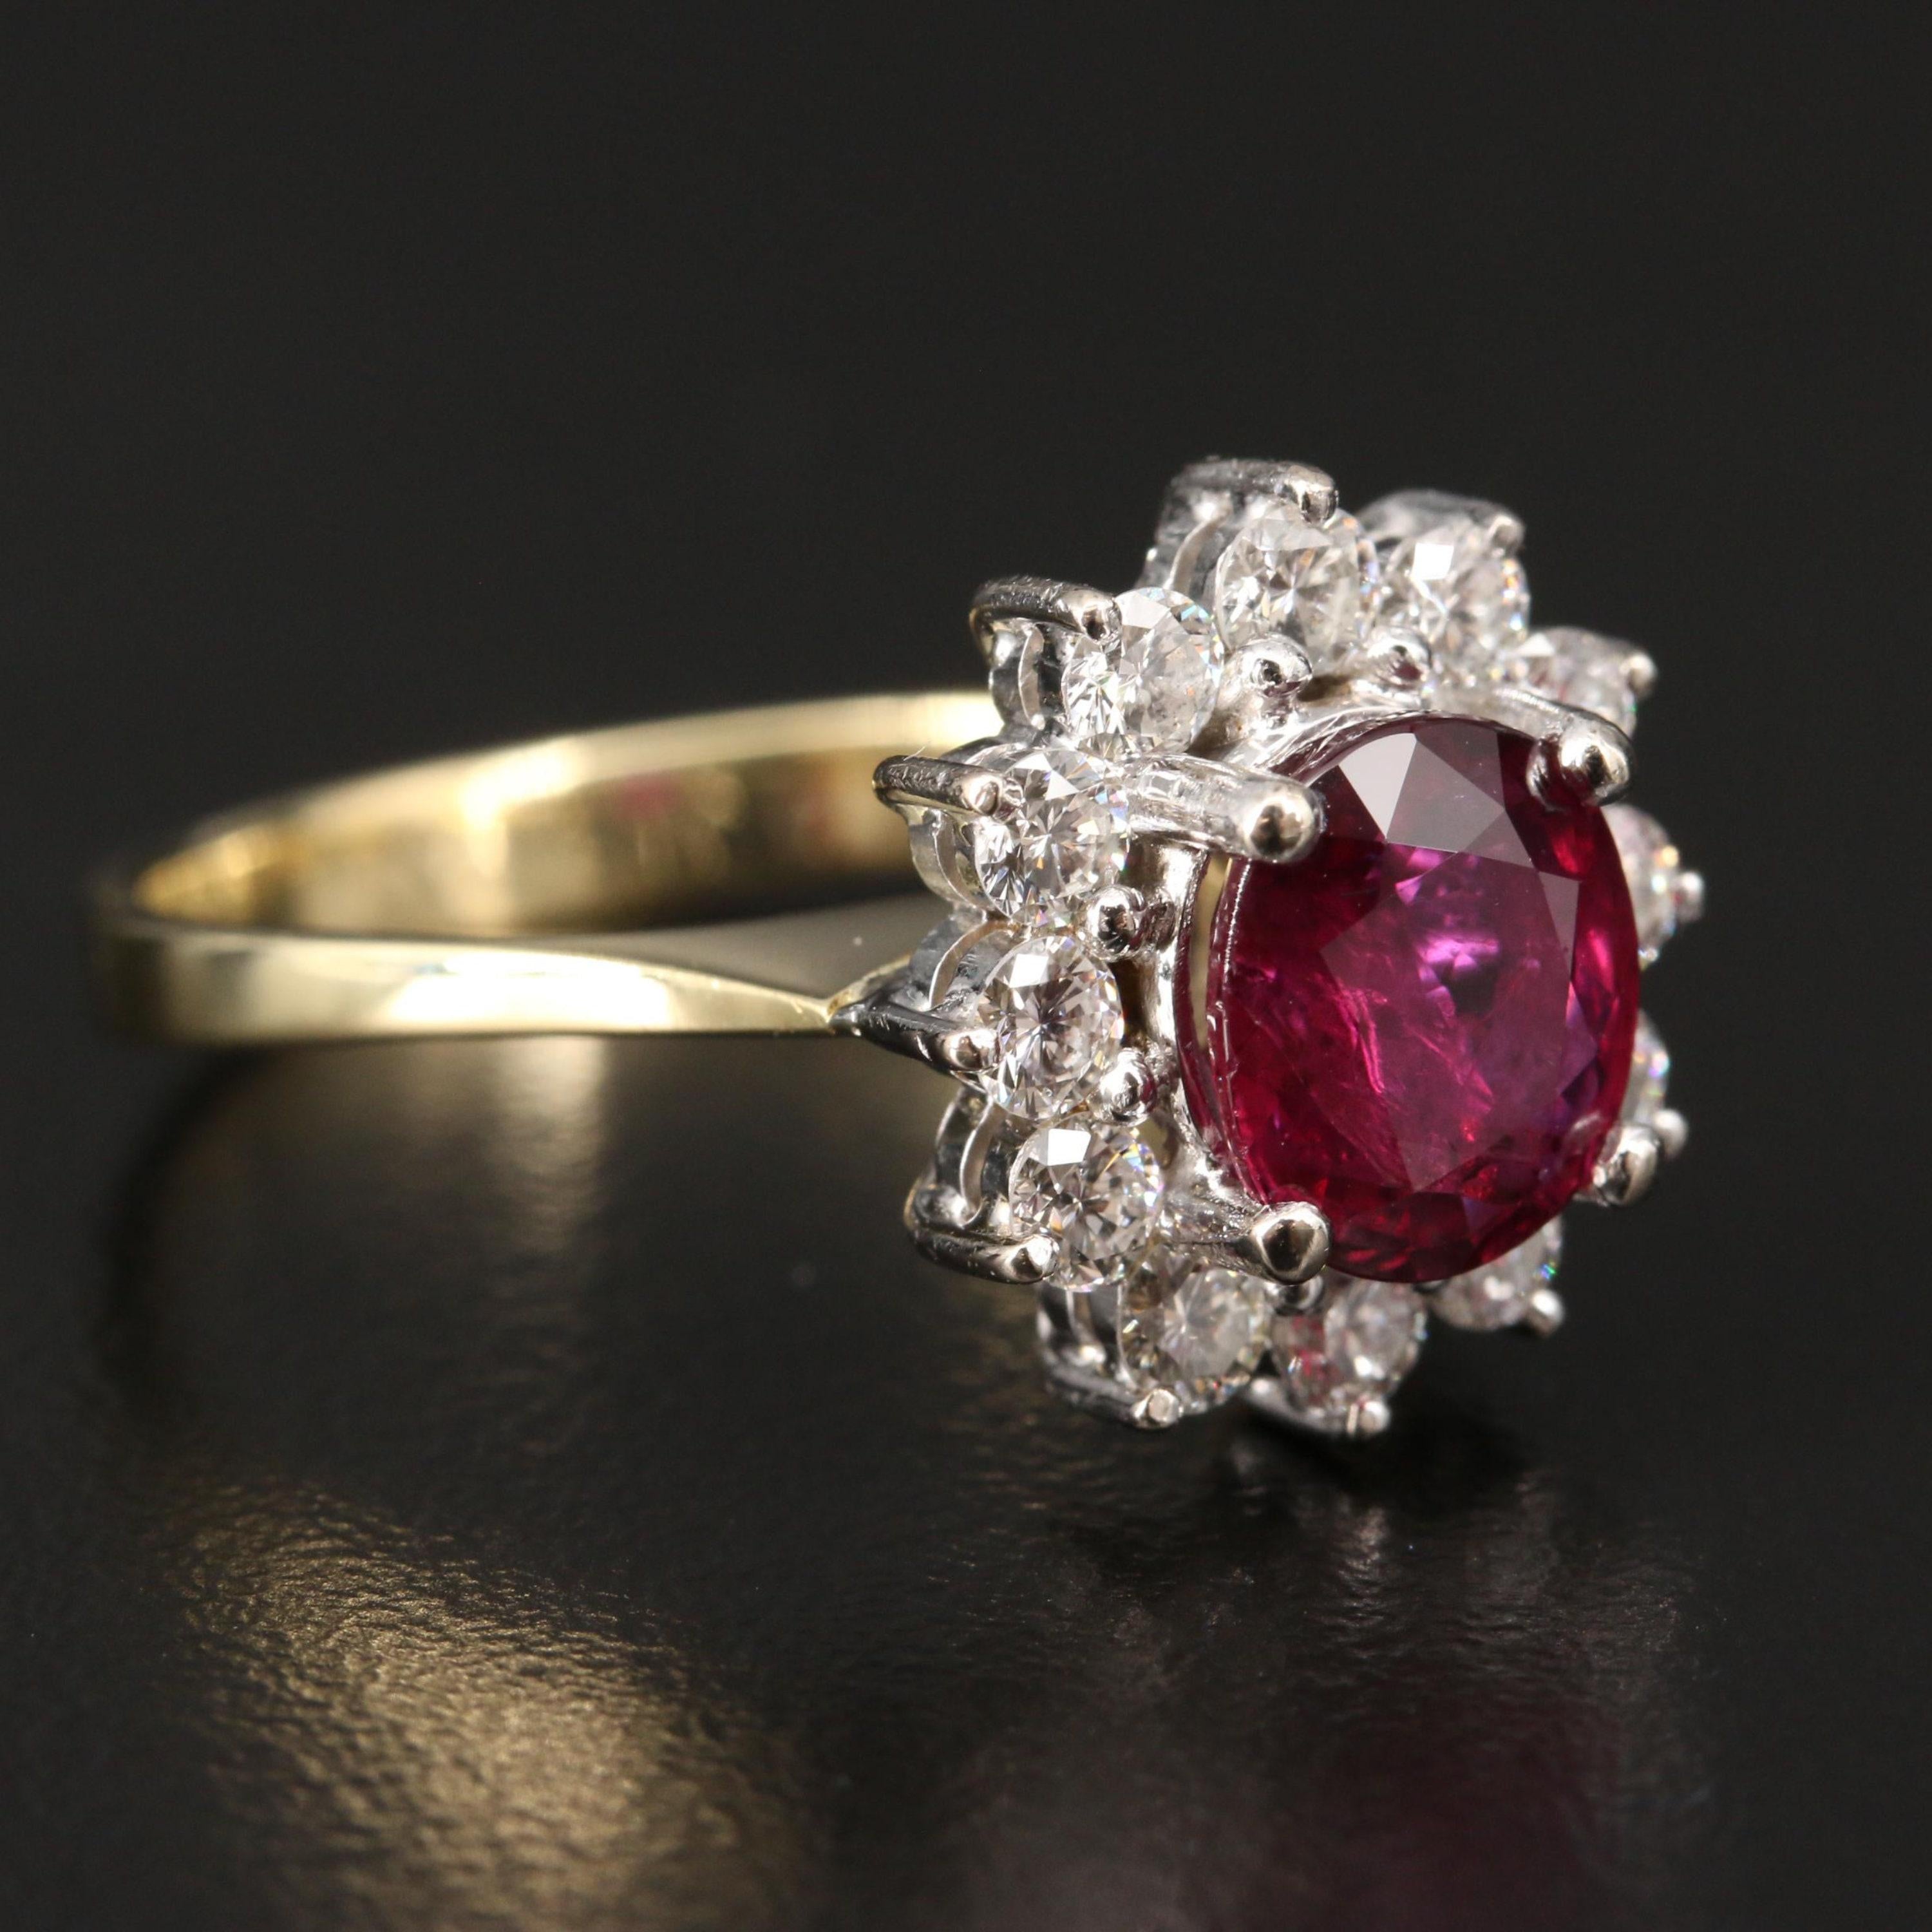 For Sale:  Certified 1.19 Carat Ruby Diamond Engagement Ring Floral Halo Ruby Bridal Ring 6